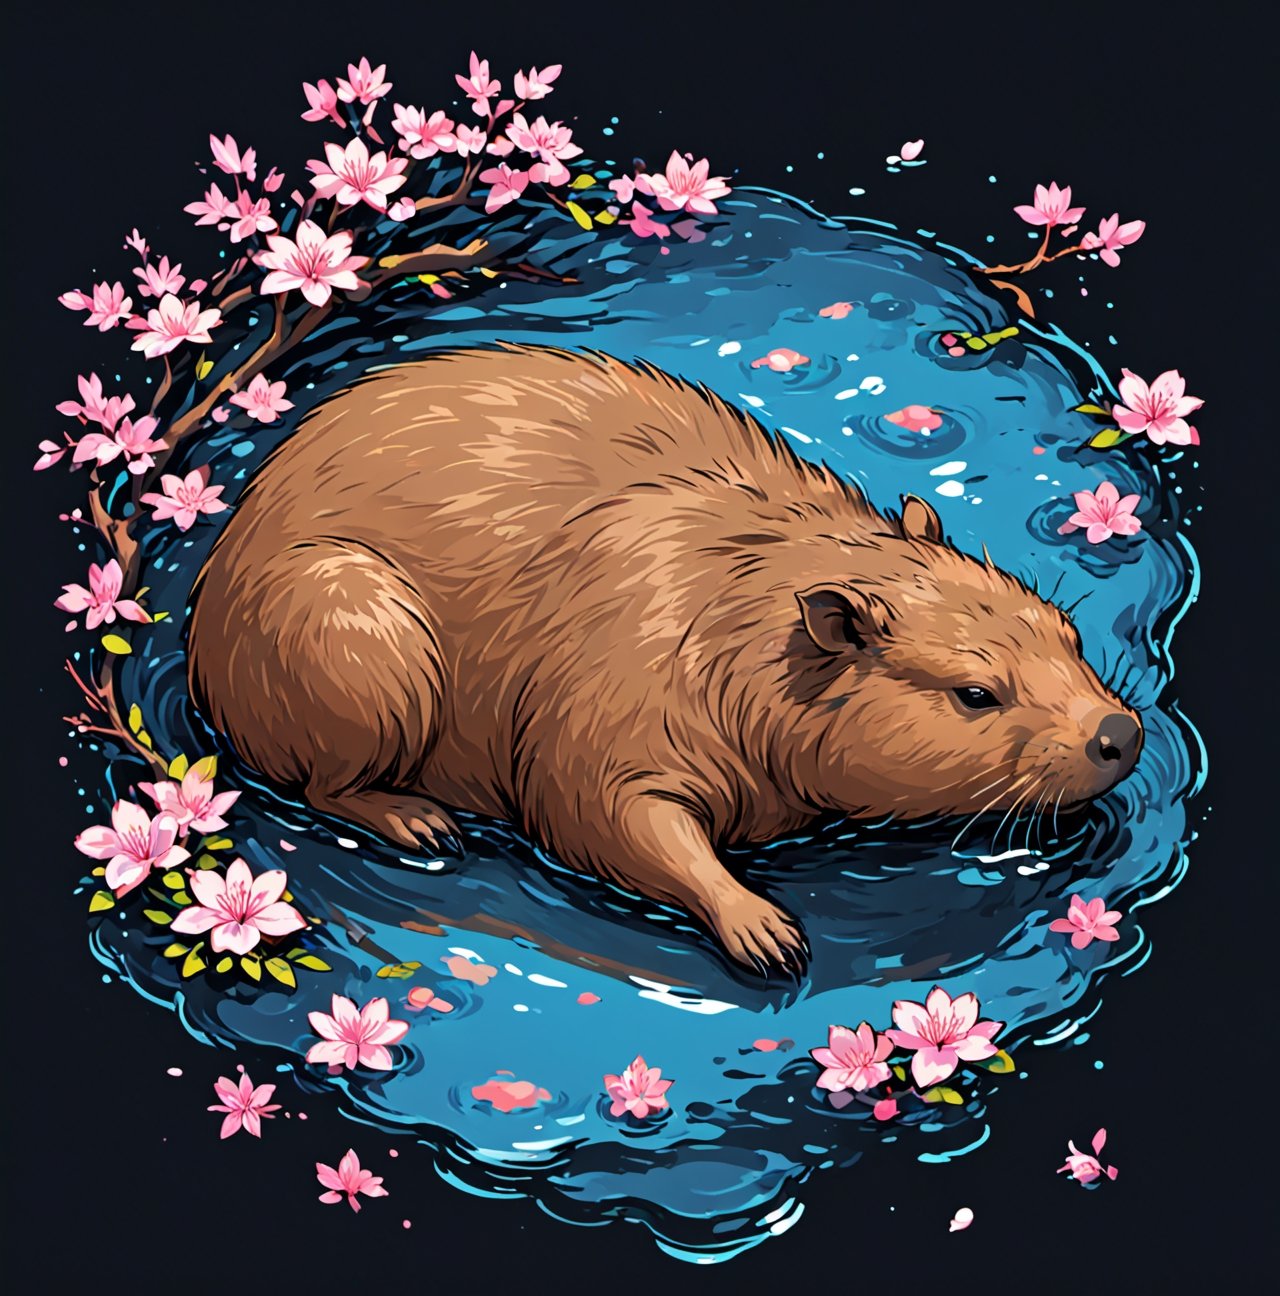 capybara sleeping, hot springs, cherry blossoms floating in water, bright blue water, reflective water ripples, black background, pro vector, full design, solid colors, no shadows, full design, isometric, sticker,tshirt design,vector art illustration,T-shirt design illustration,more detail XL